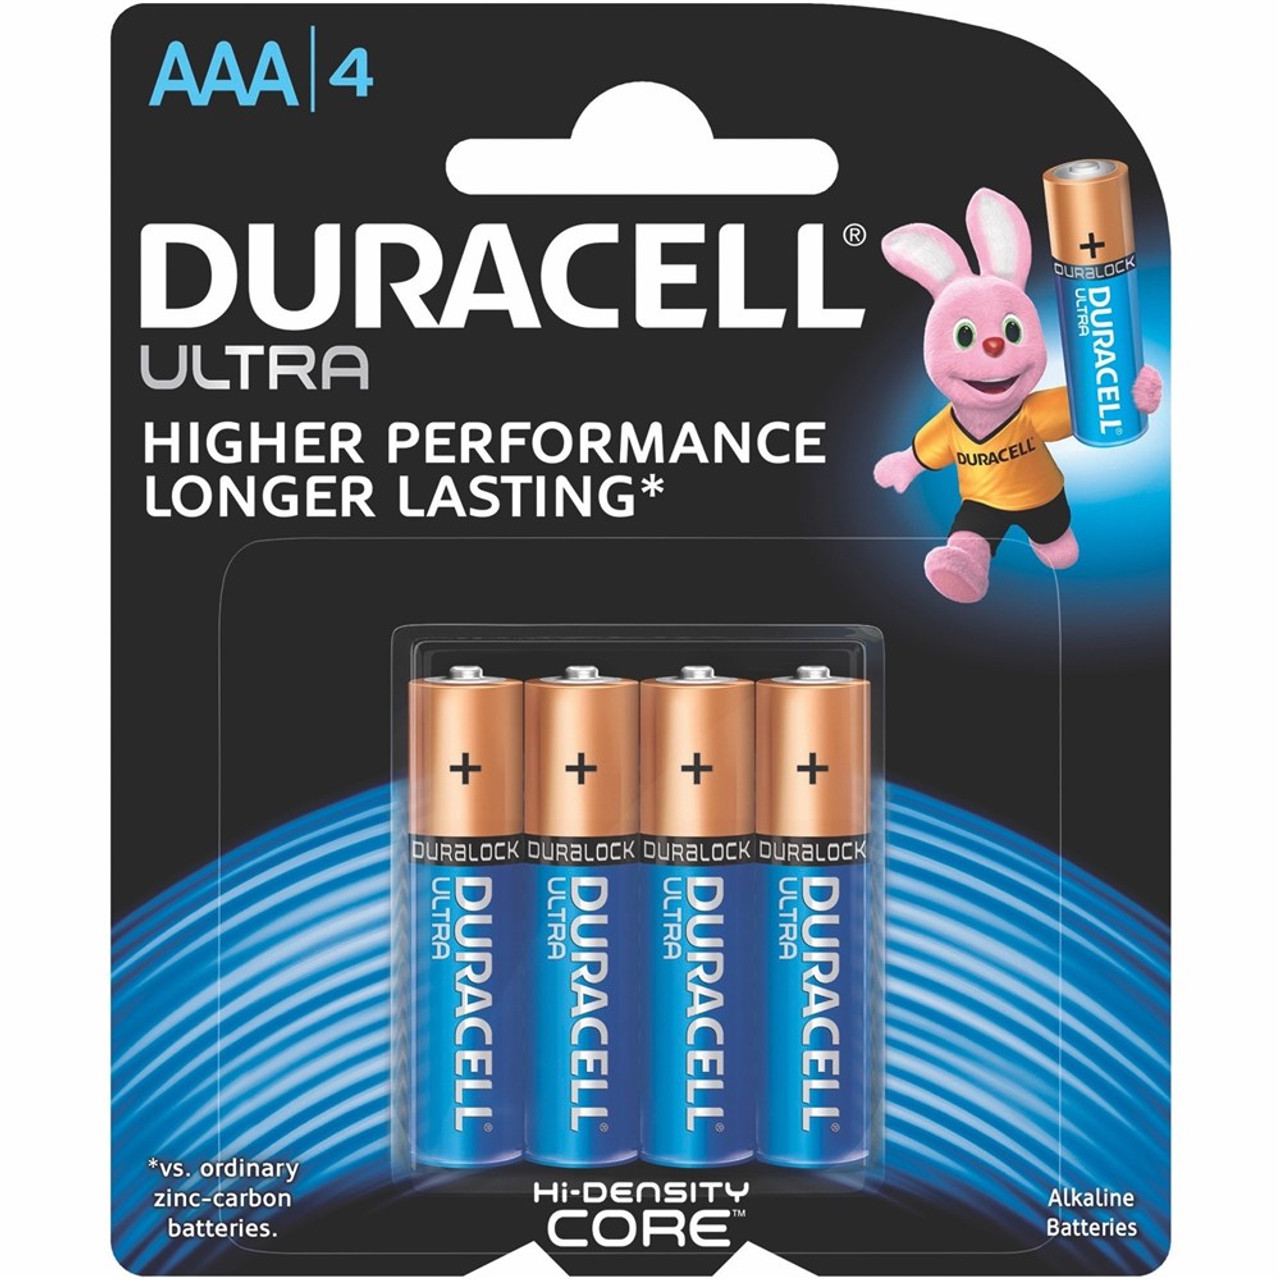 Ultra battery. Дюрасел ультра 4. Duracell Ultra AAA. Duracell ААА 4 Dual Rock. Duracell Ultra our longest lasting Battery.